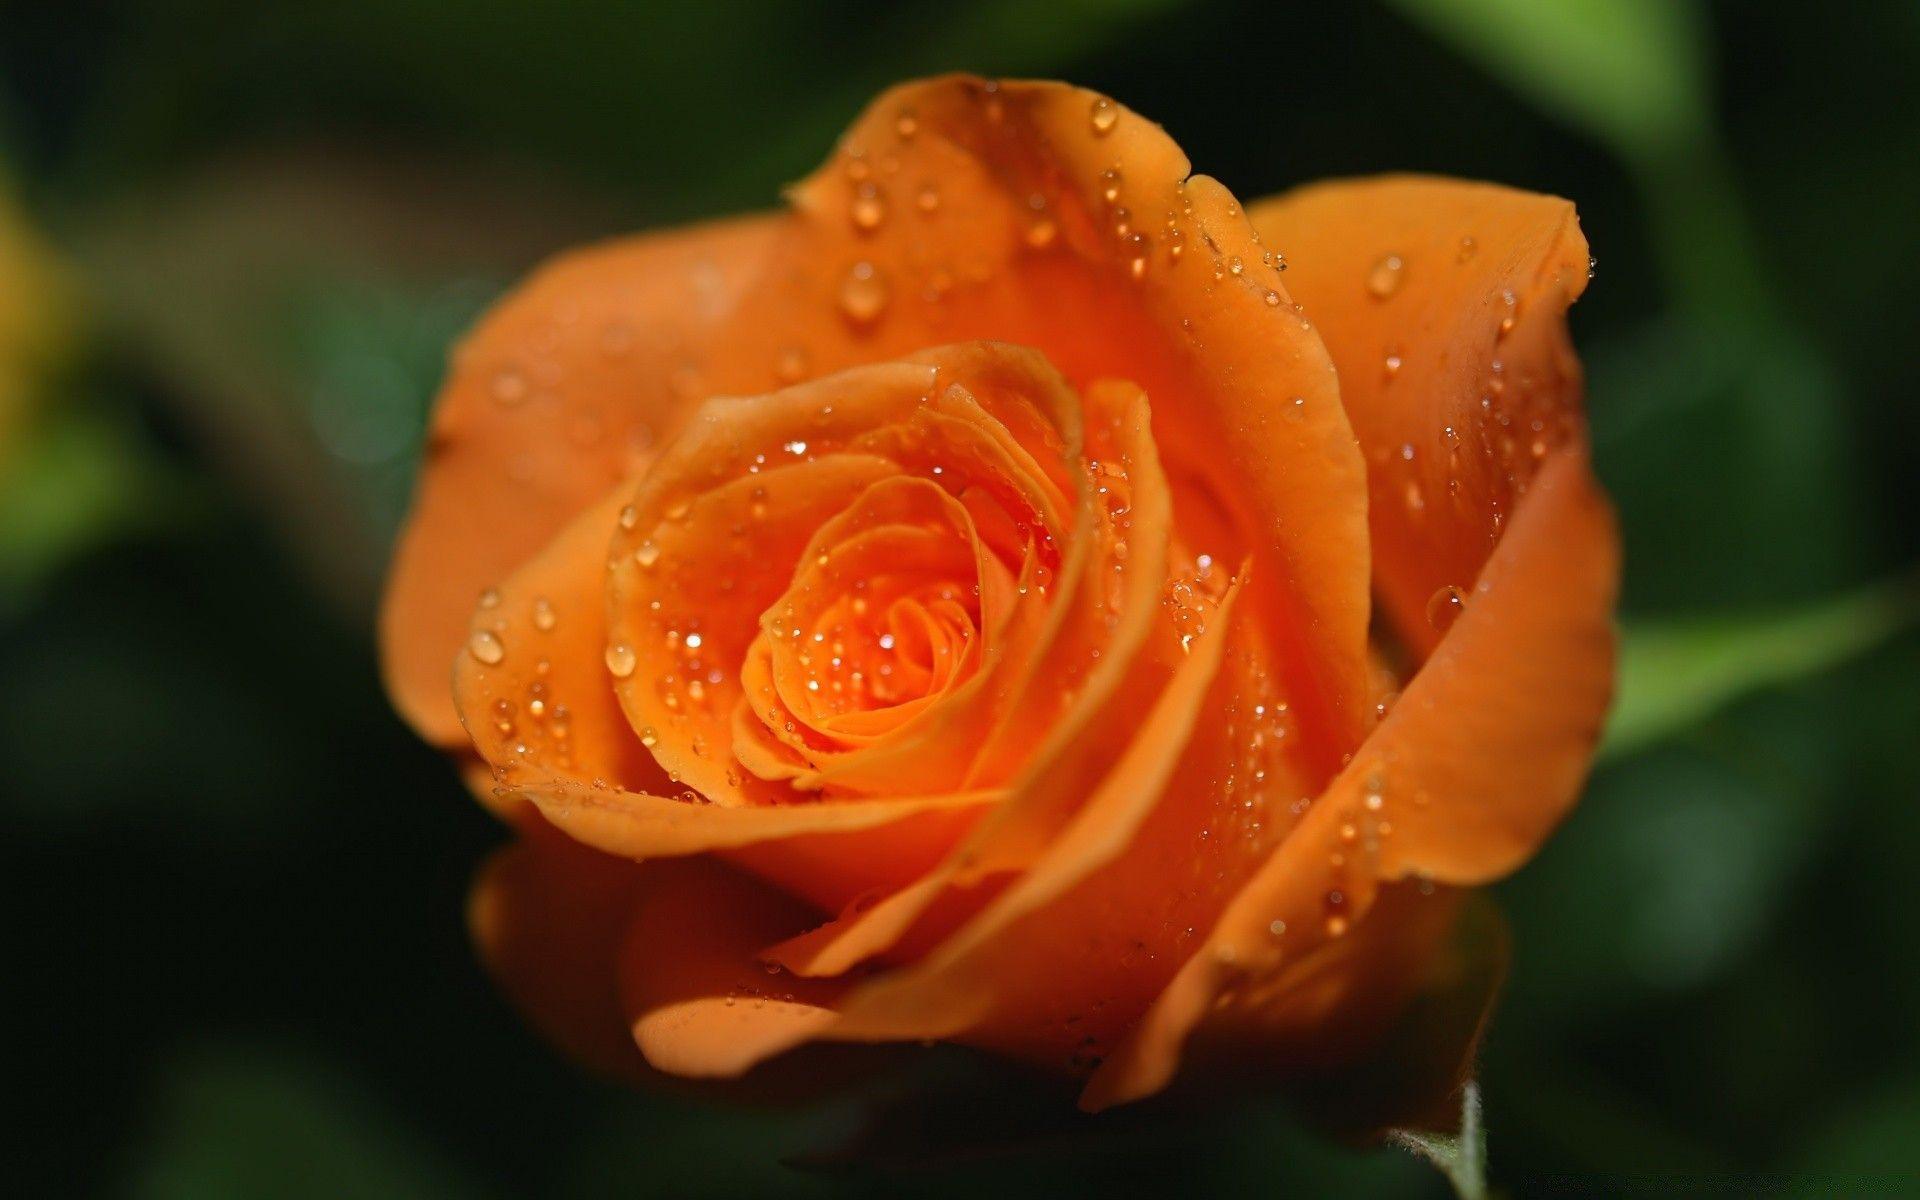 Orange Rose Bud. Android wallpaper for free